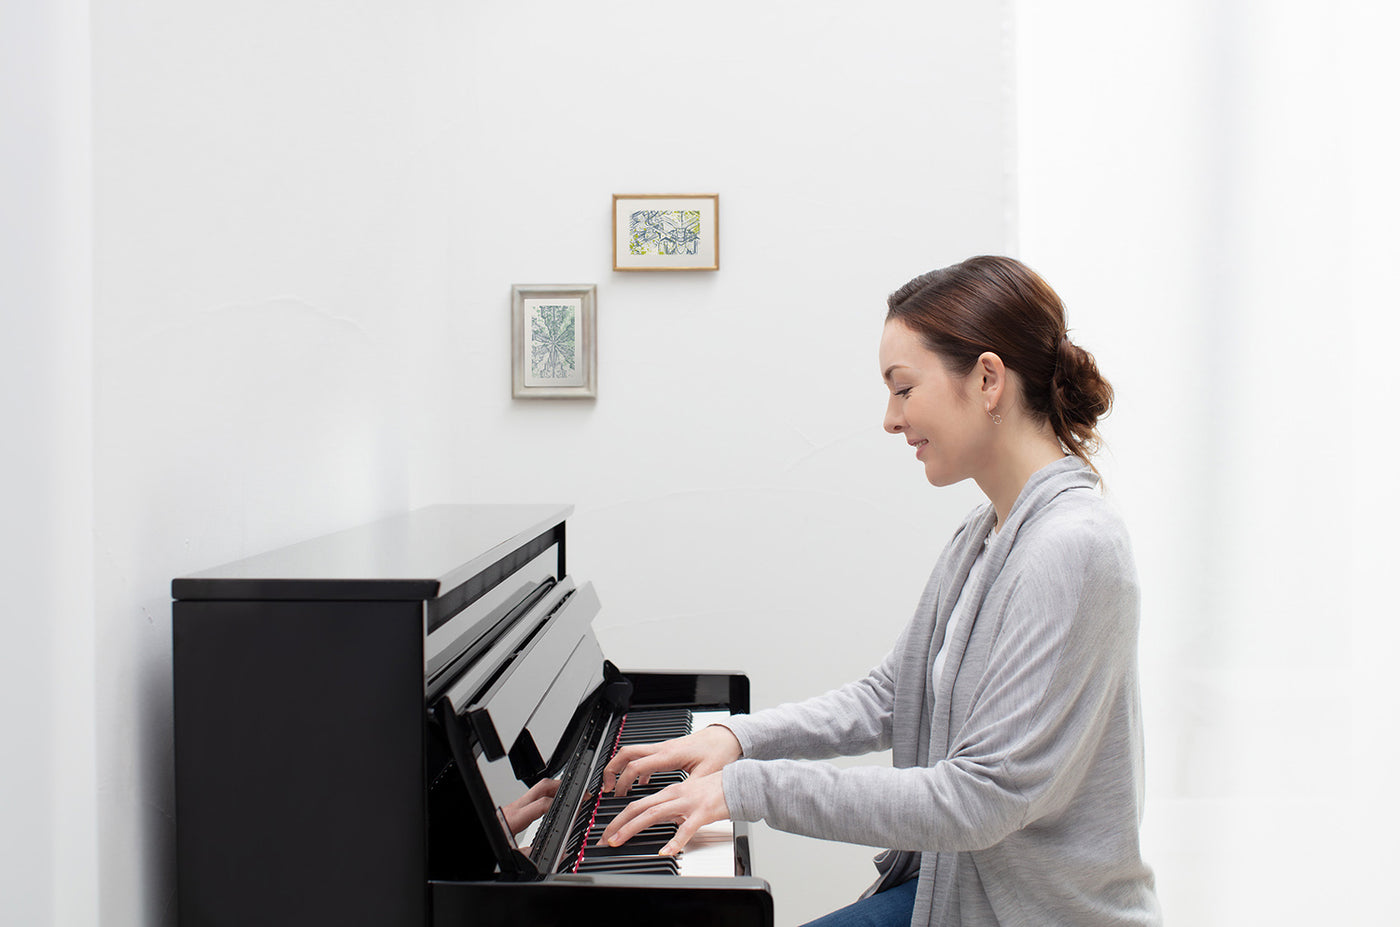 Woman practicing on a modern upright piano in a brightly lit room with framed artwork on the wall.